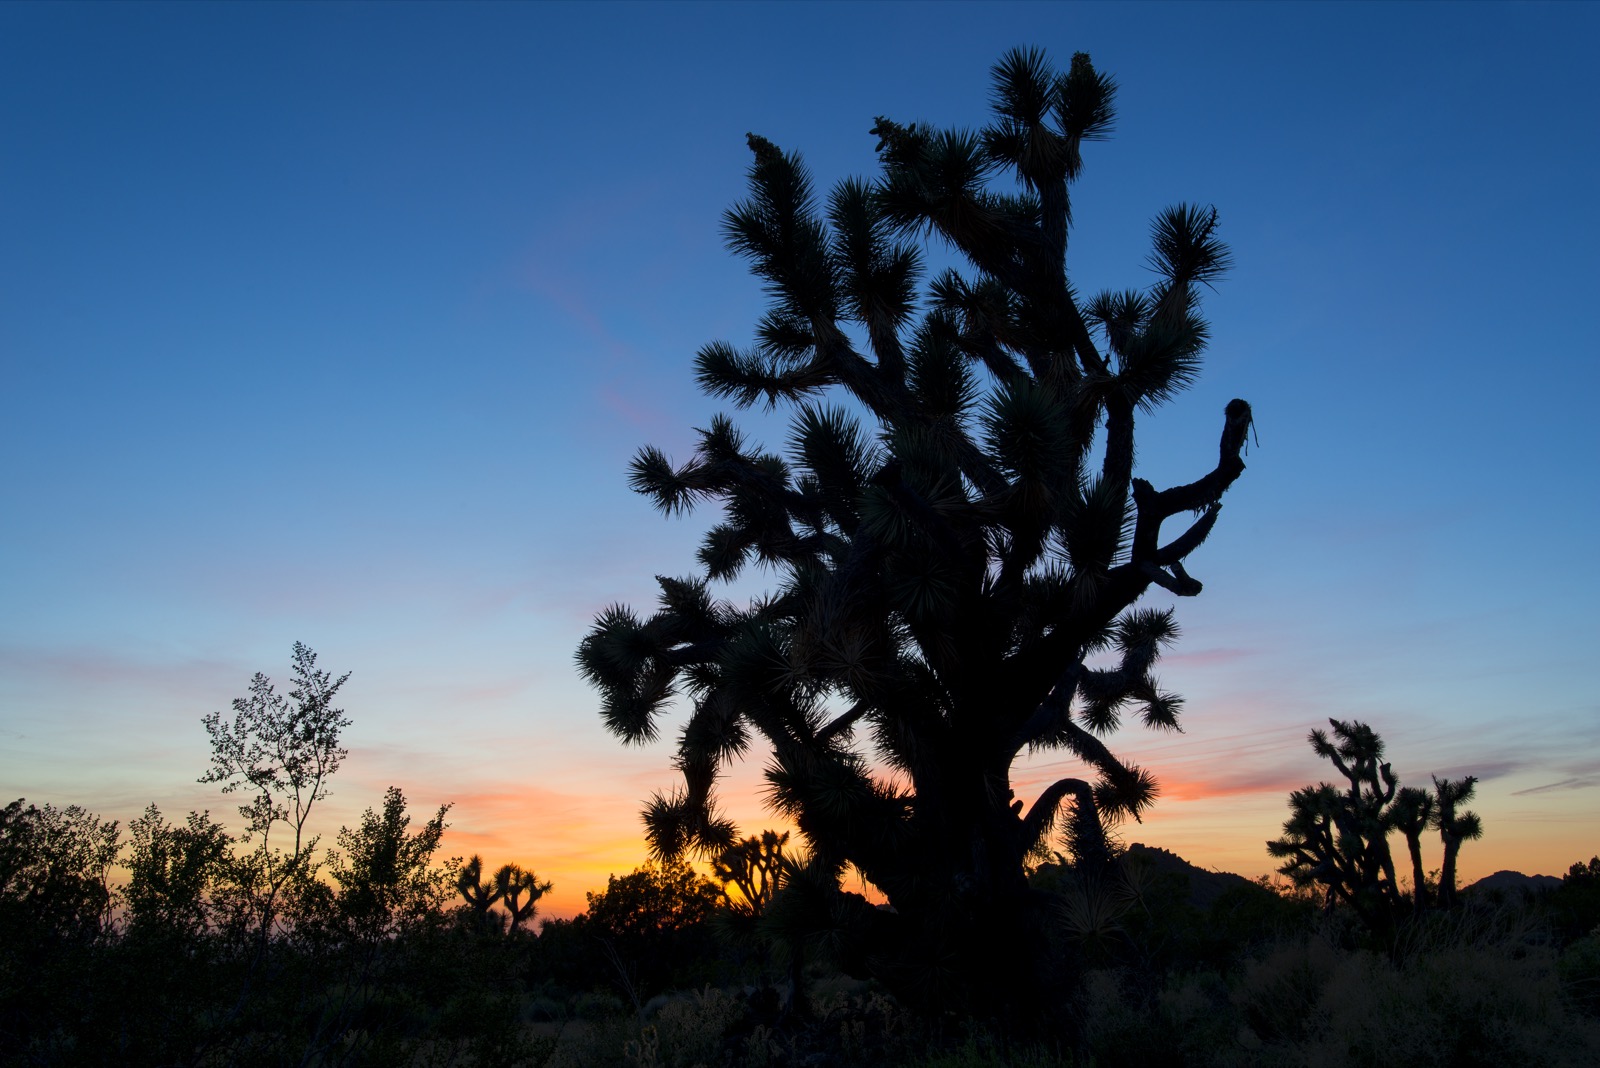 Stagecoach Trails Ranch featuring Joshua Tree backlit by the sunset